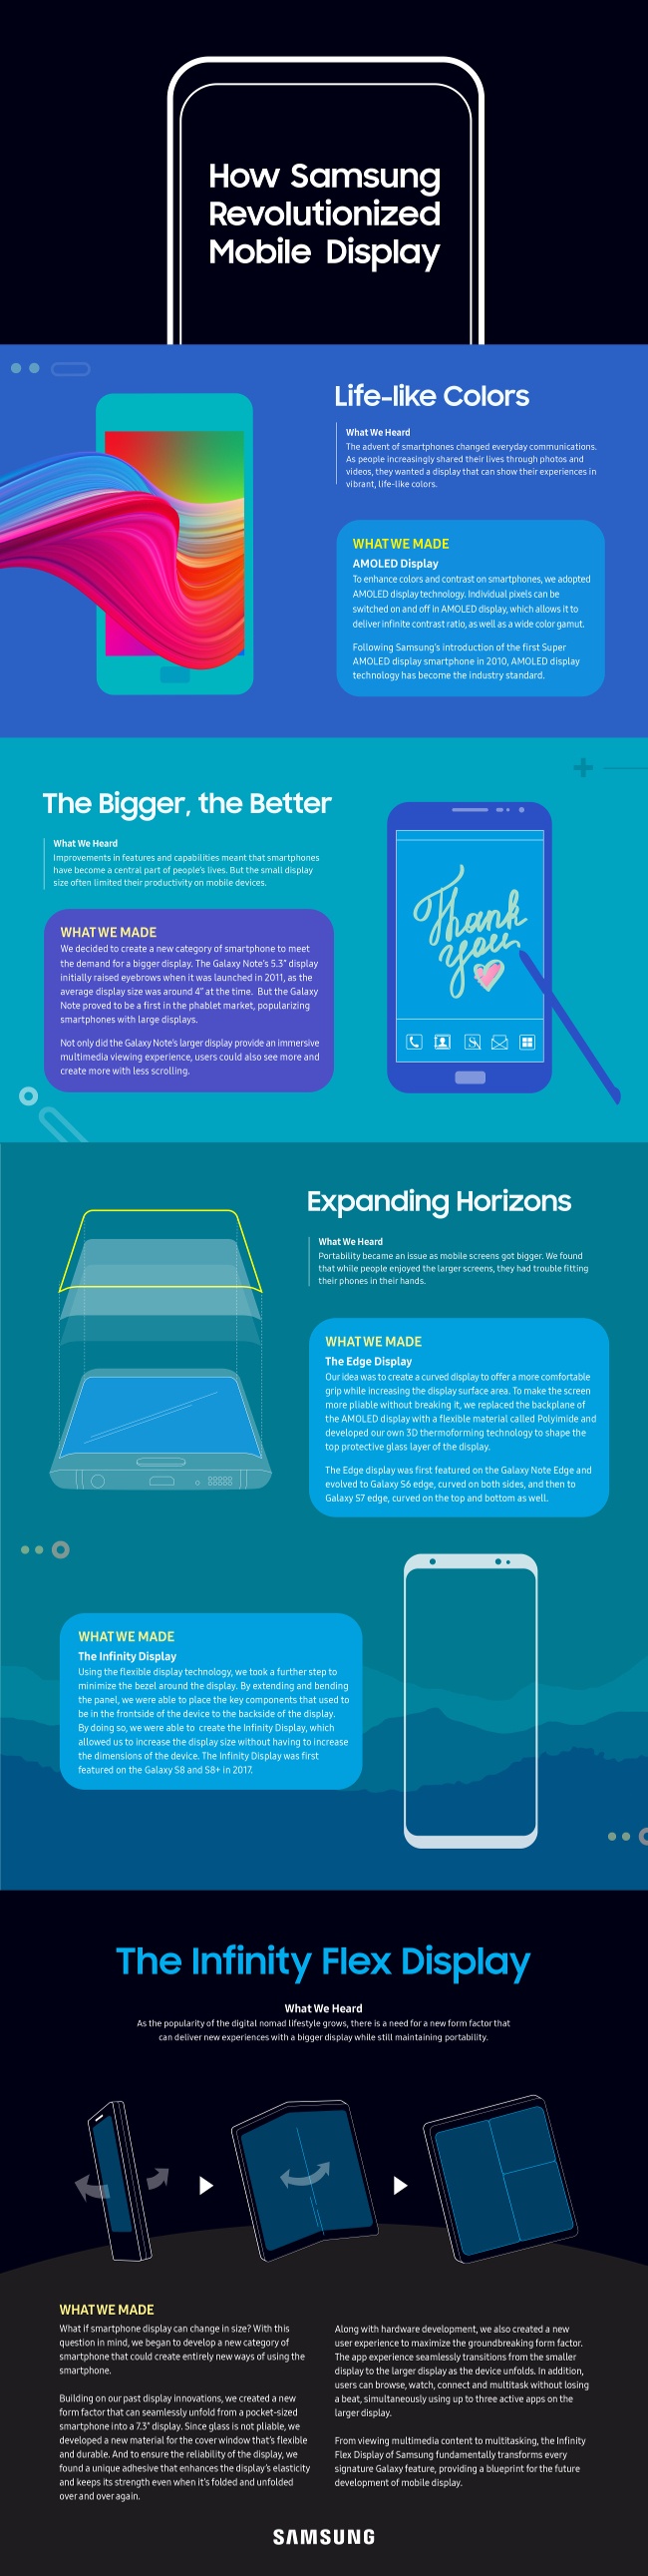 samsung infographic detailing how foldable phones came to be.